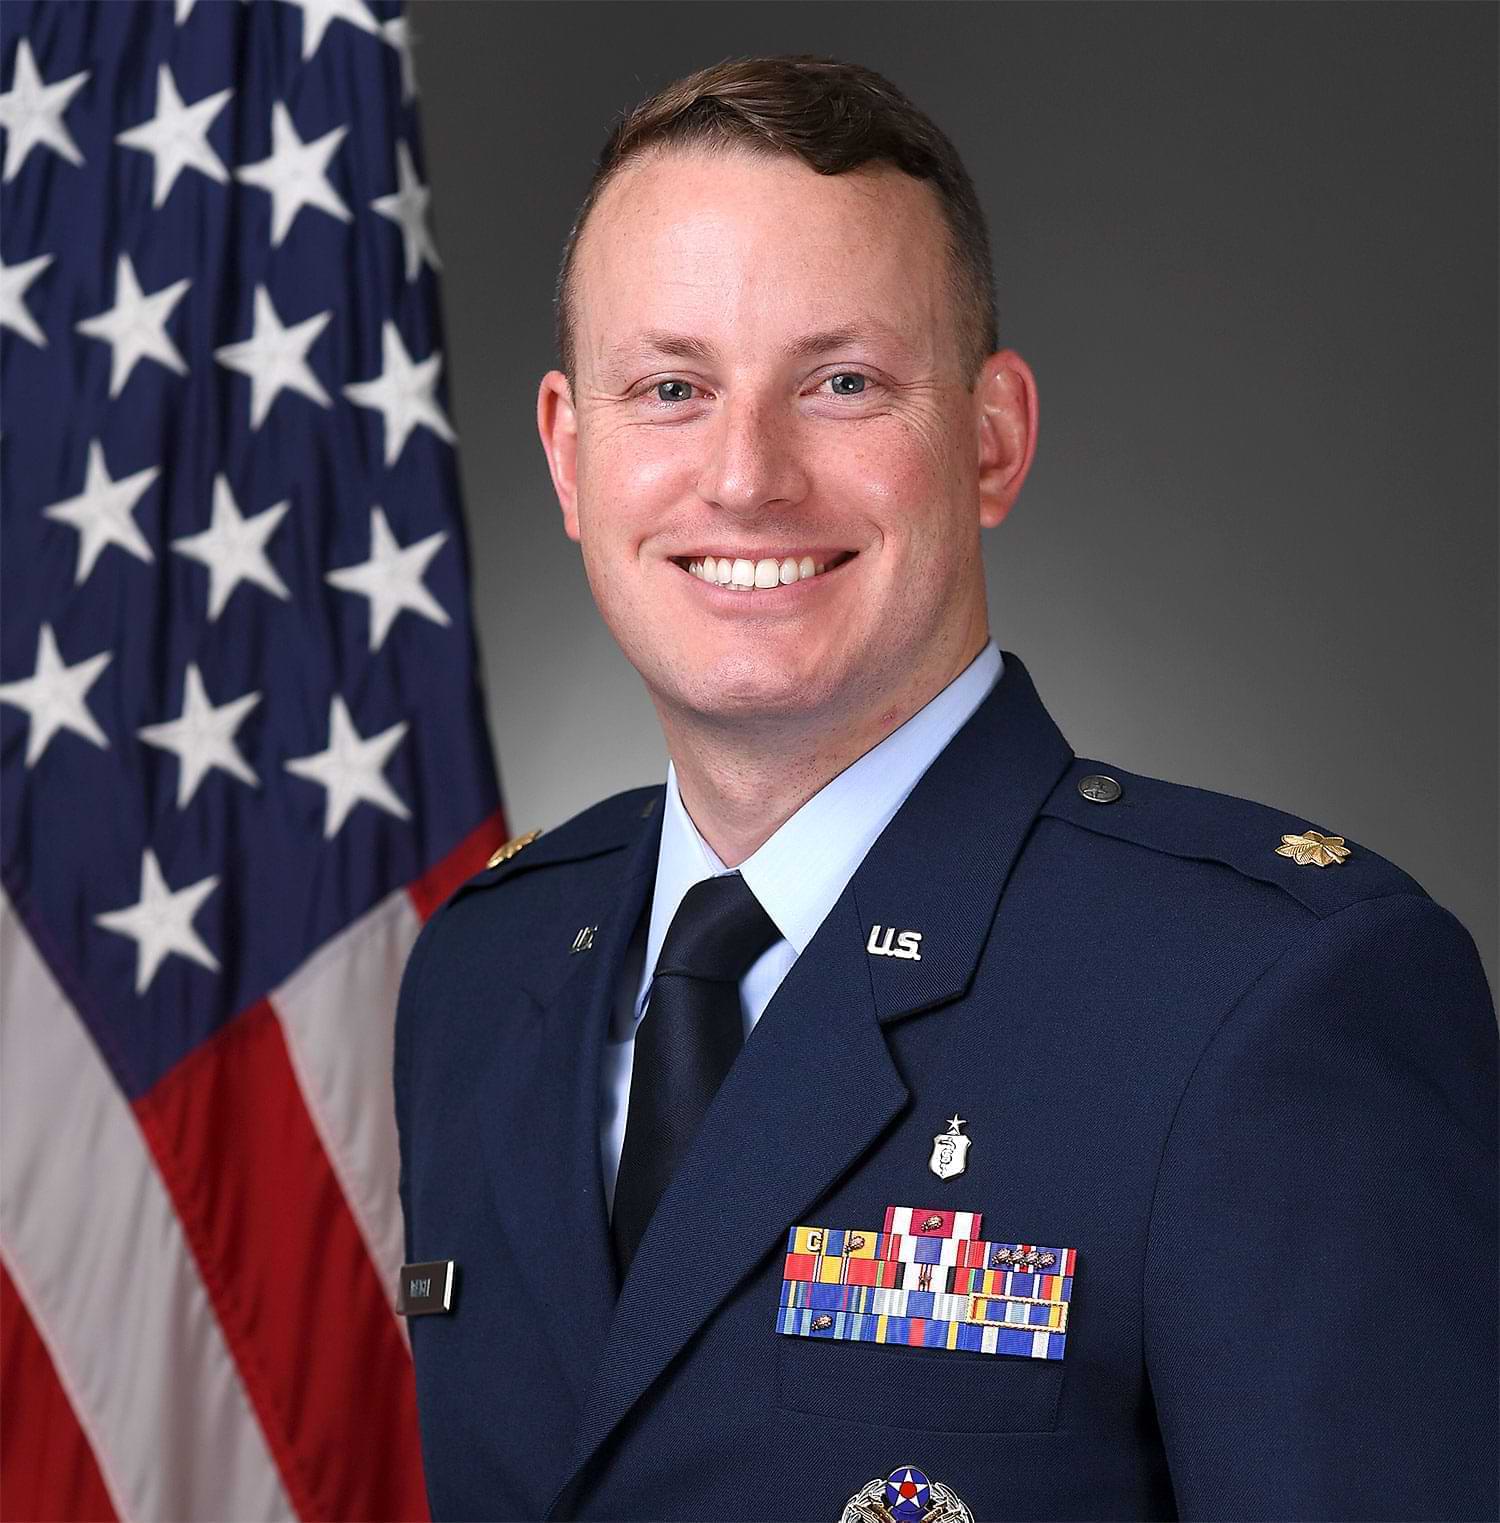 Square portrait photograph of Timothy Weigle, PharmD smiling in his United States Air Force outfit while posing in front of the American flag